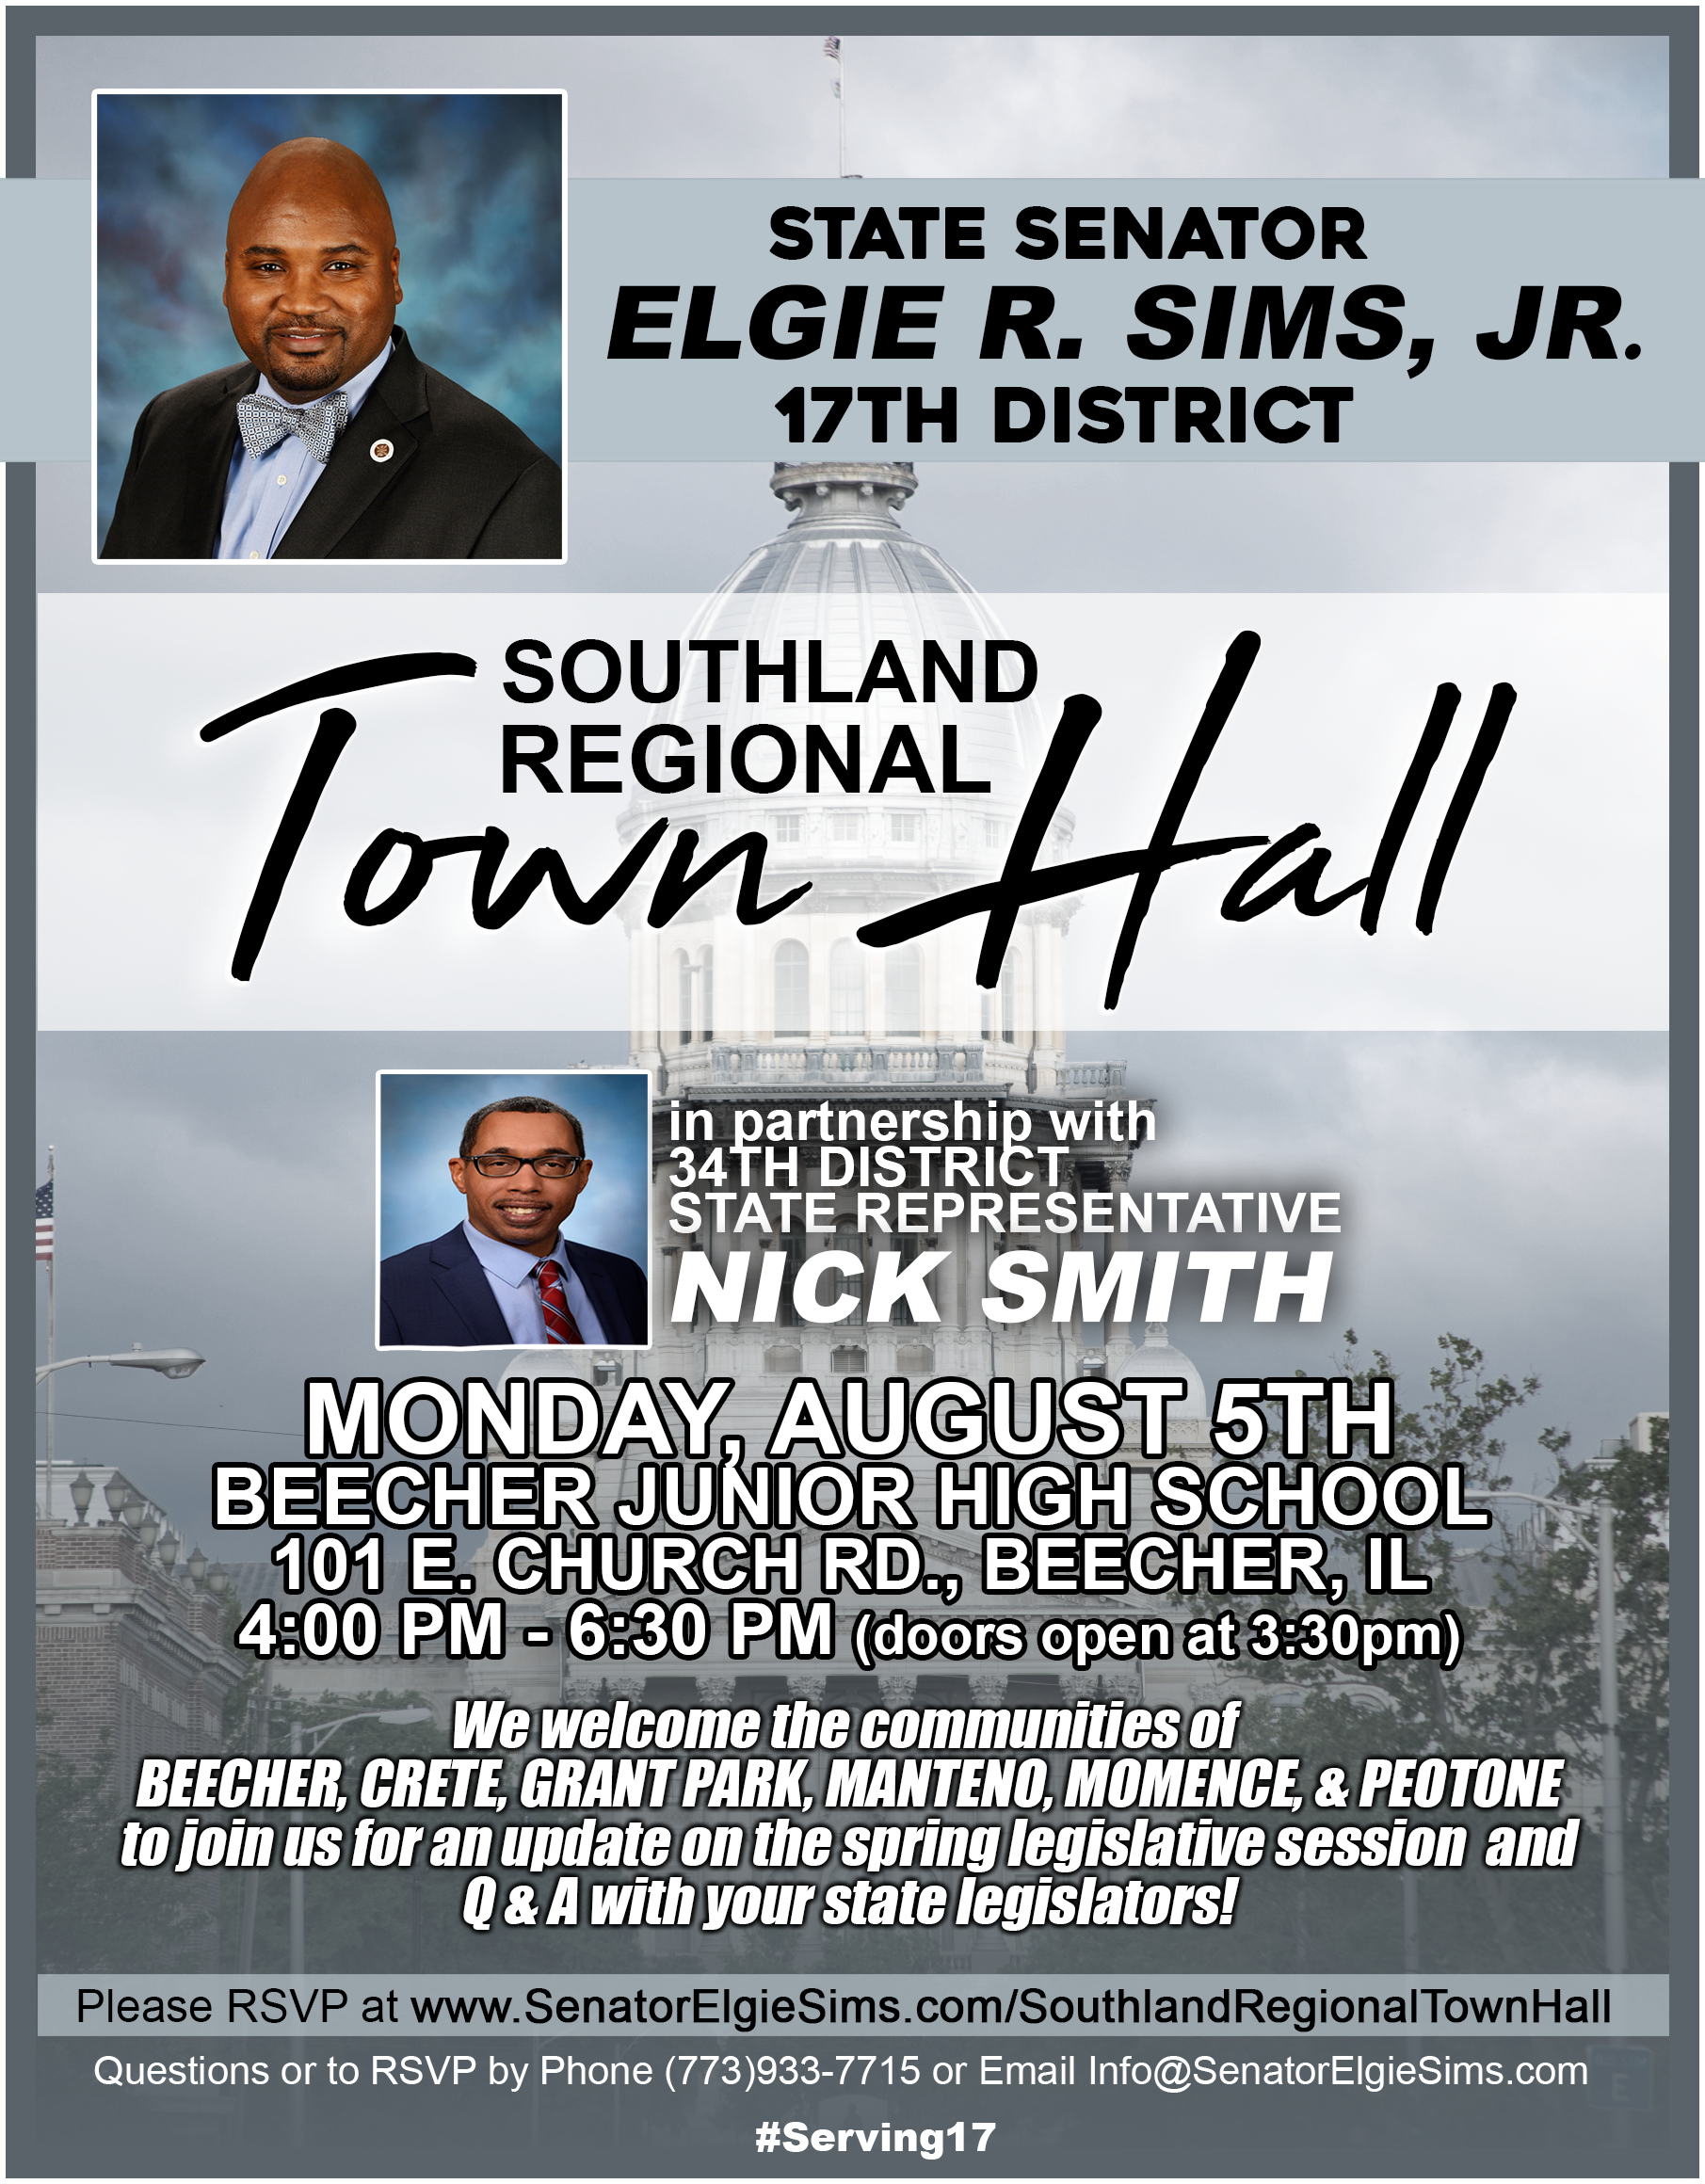 2019 SOUTHLAND REGIONAL TOWN HALL FLIER